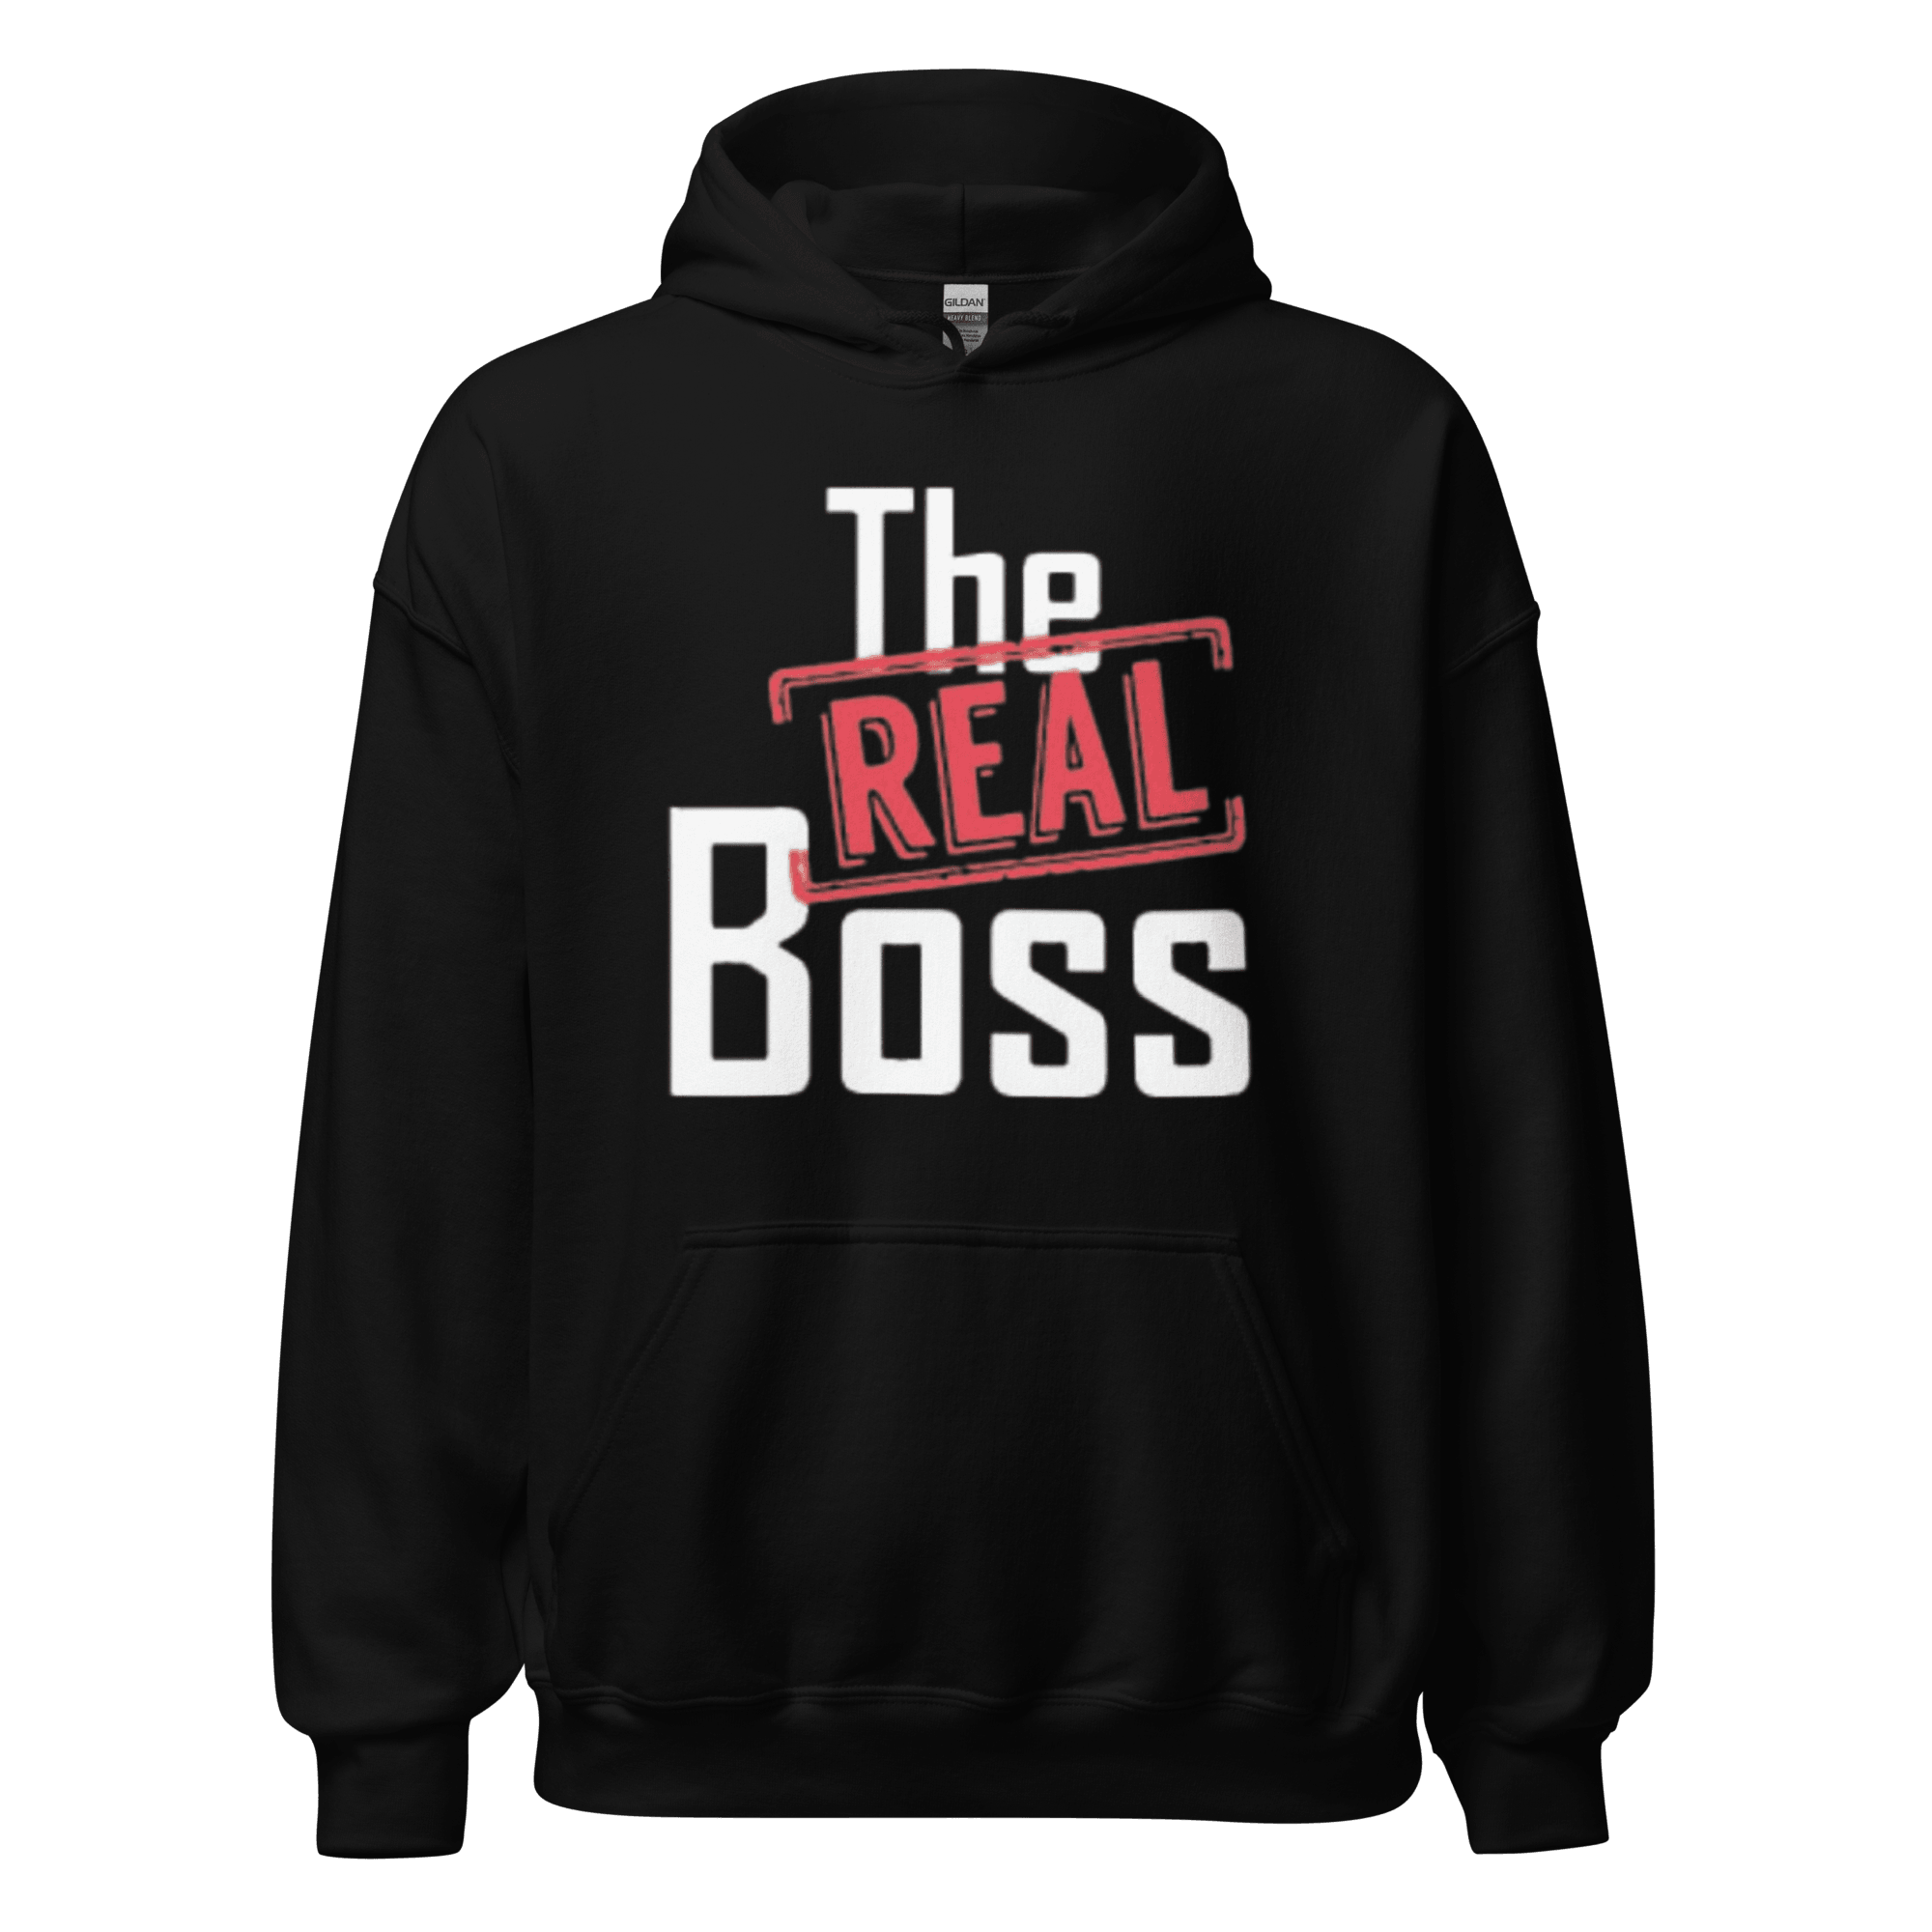 The Boss/The Real Boss Couples Hoodie Set Ultra Soft Blended Cotton Pullovers - TopKoalaTee